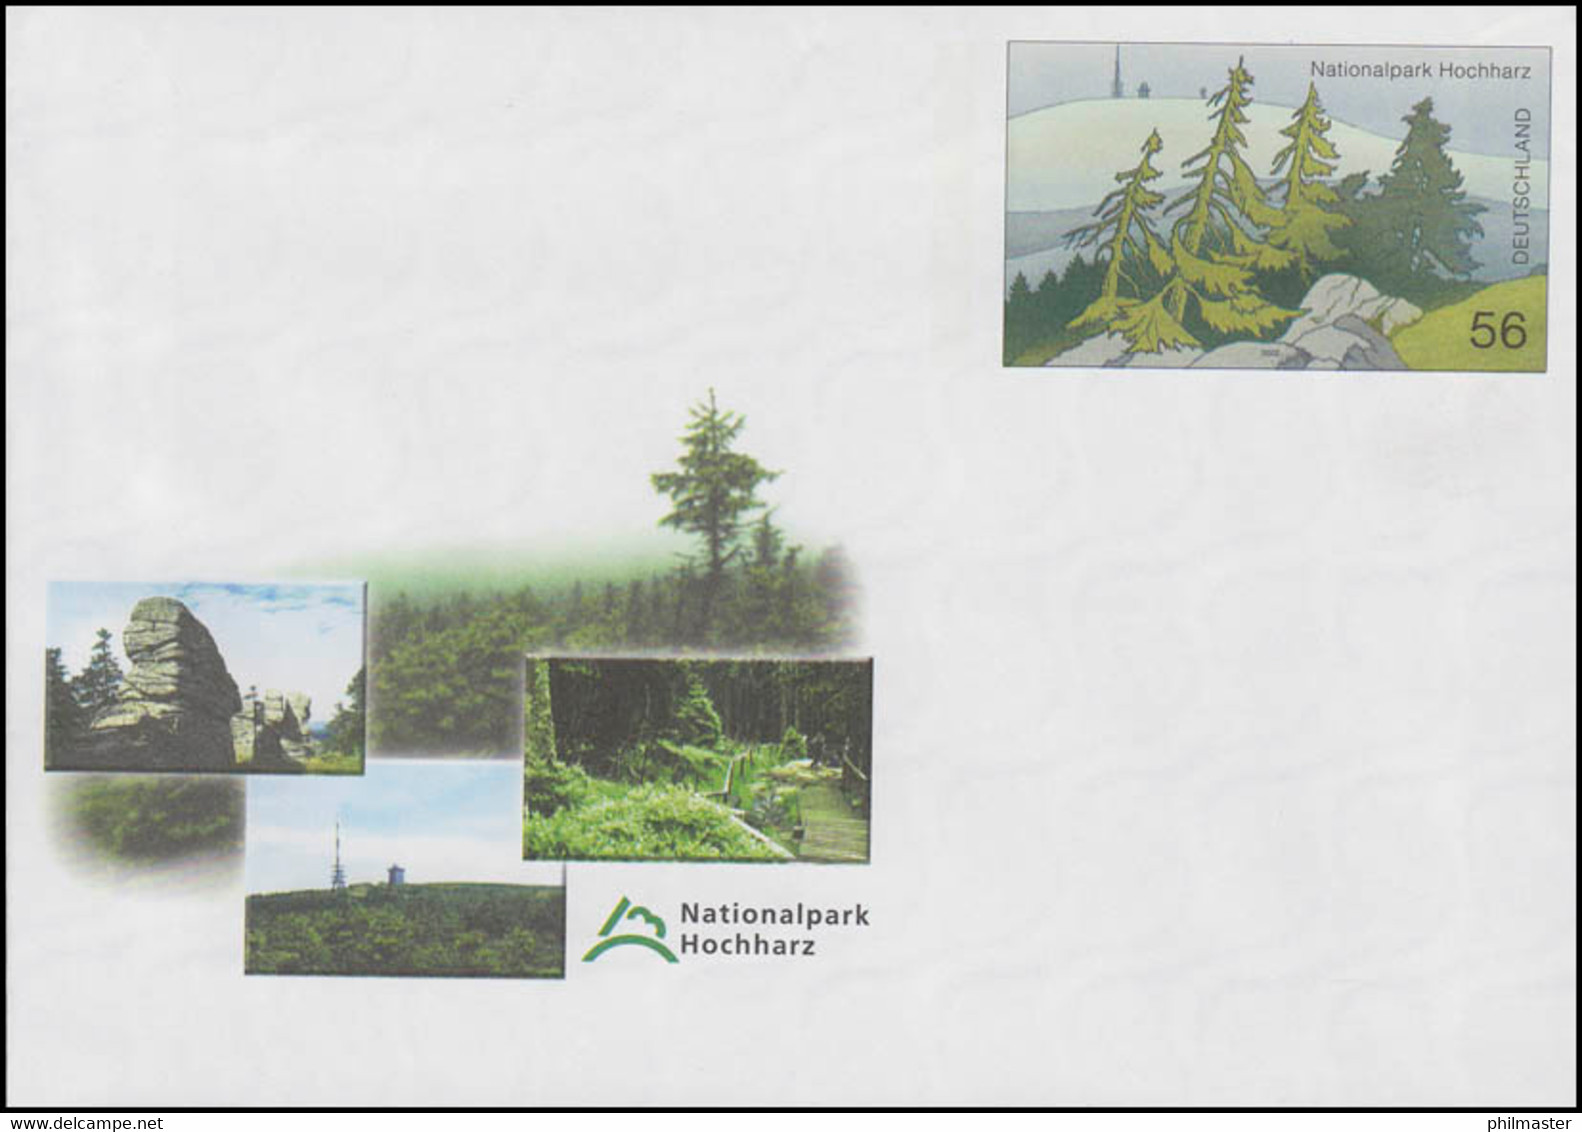 USo 39 Nationalpark Hochharz 2002, Postfrisch - Covers - Mint